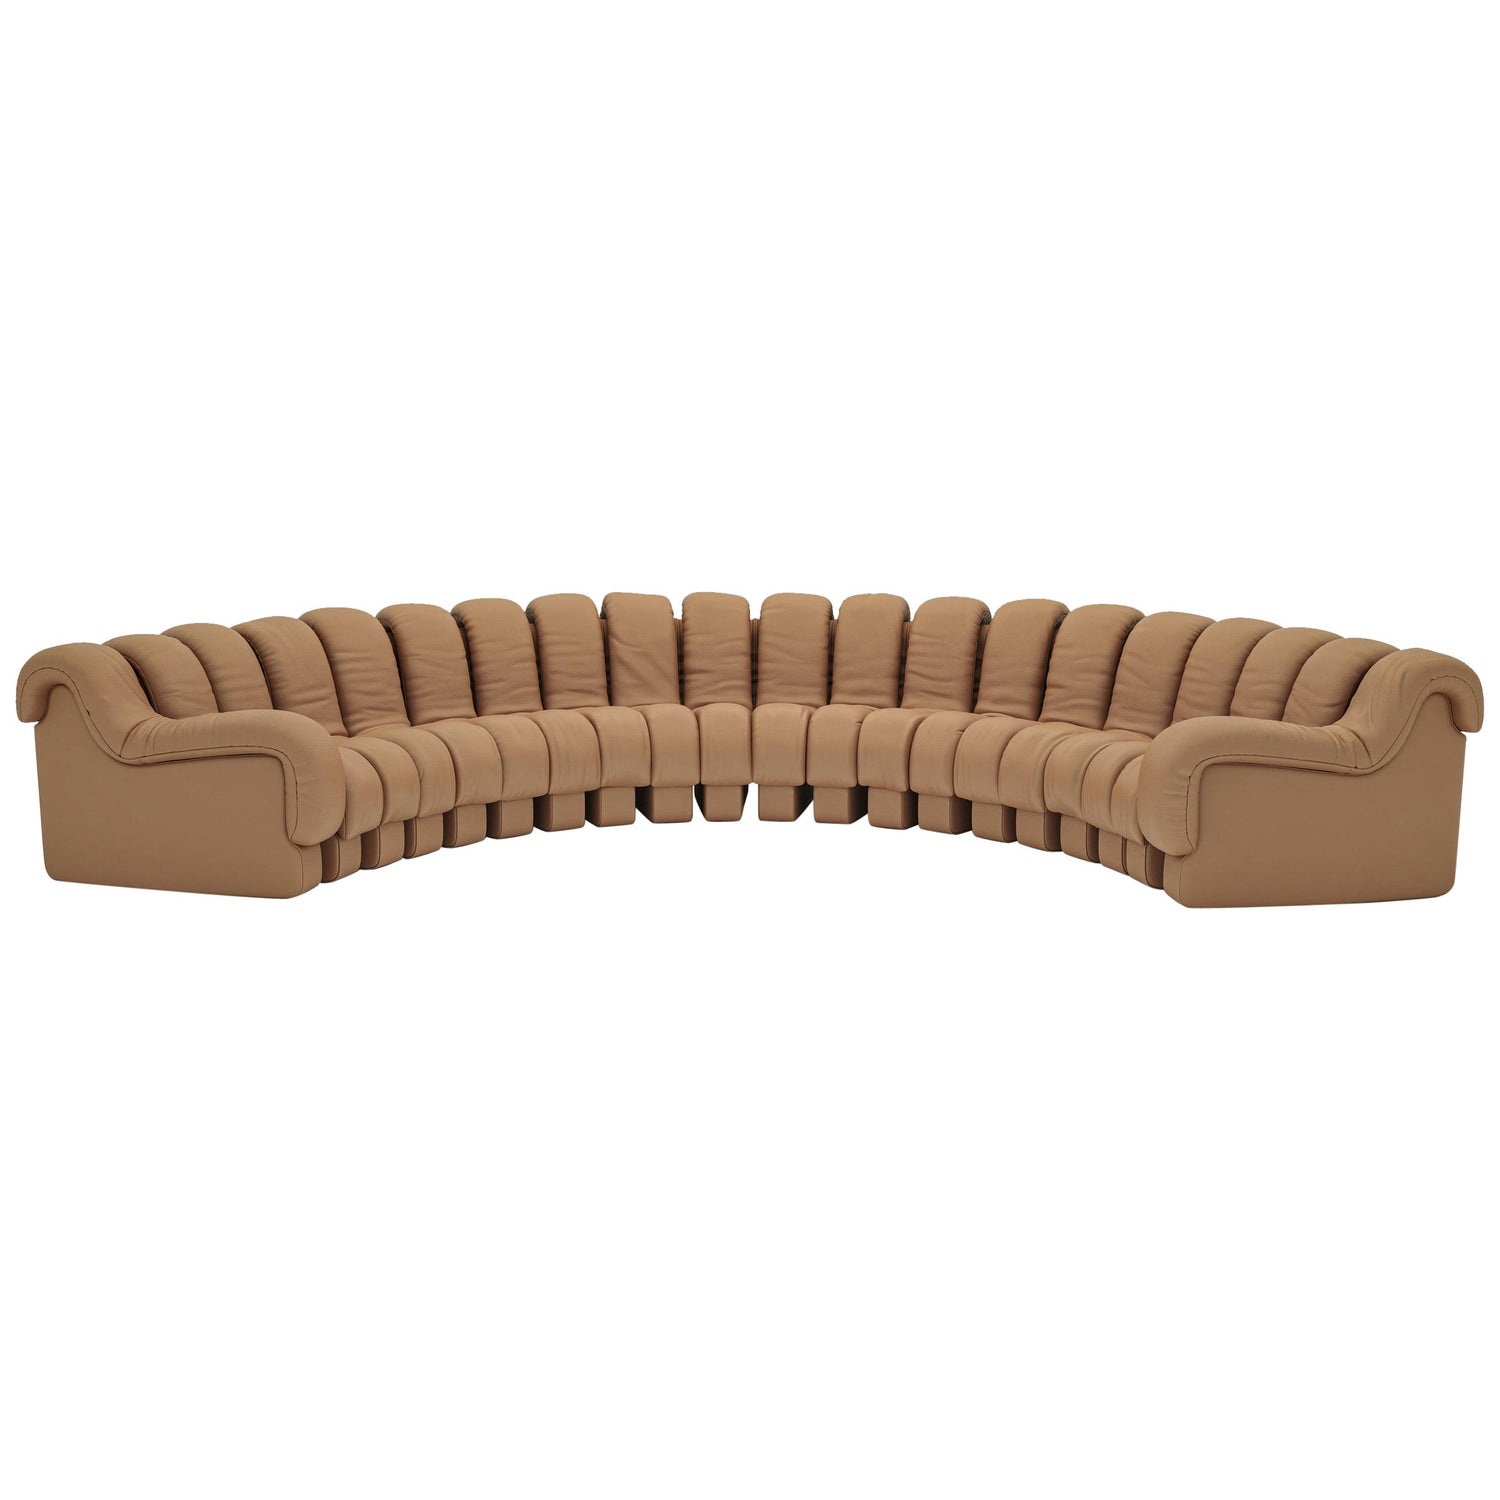 DeSede DS-600 “Non-stop” Modular Sofa in Espresso Leather and Adjustable  Elements For Sale at 1stDibs | desede furniture, desede sofa, desede couch